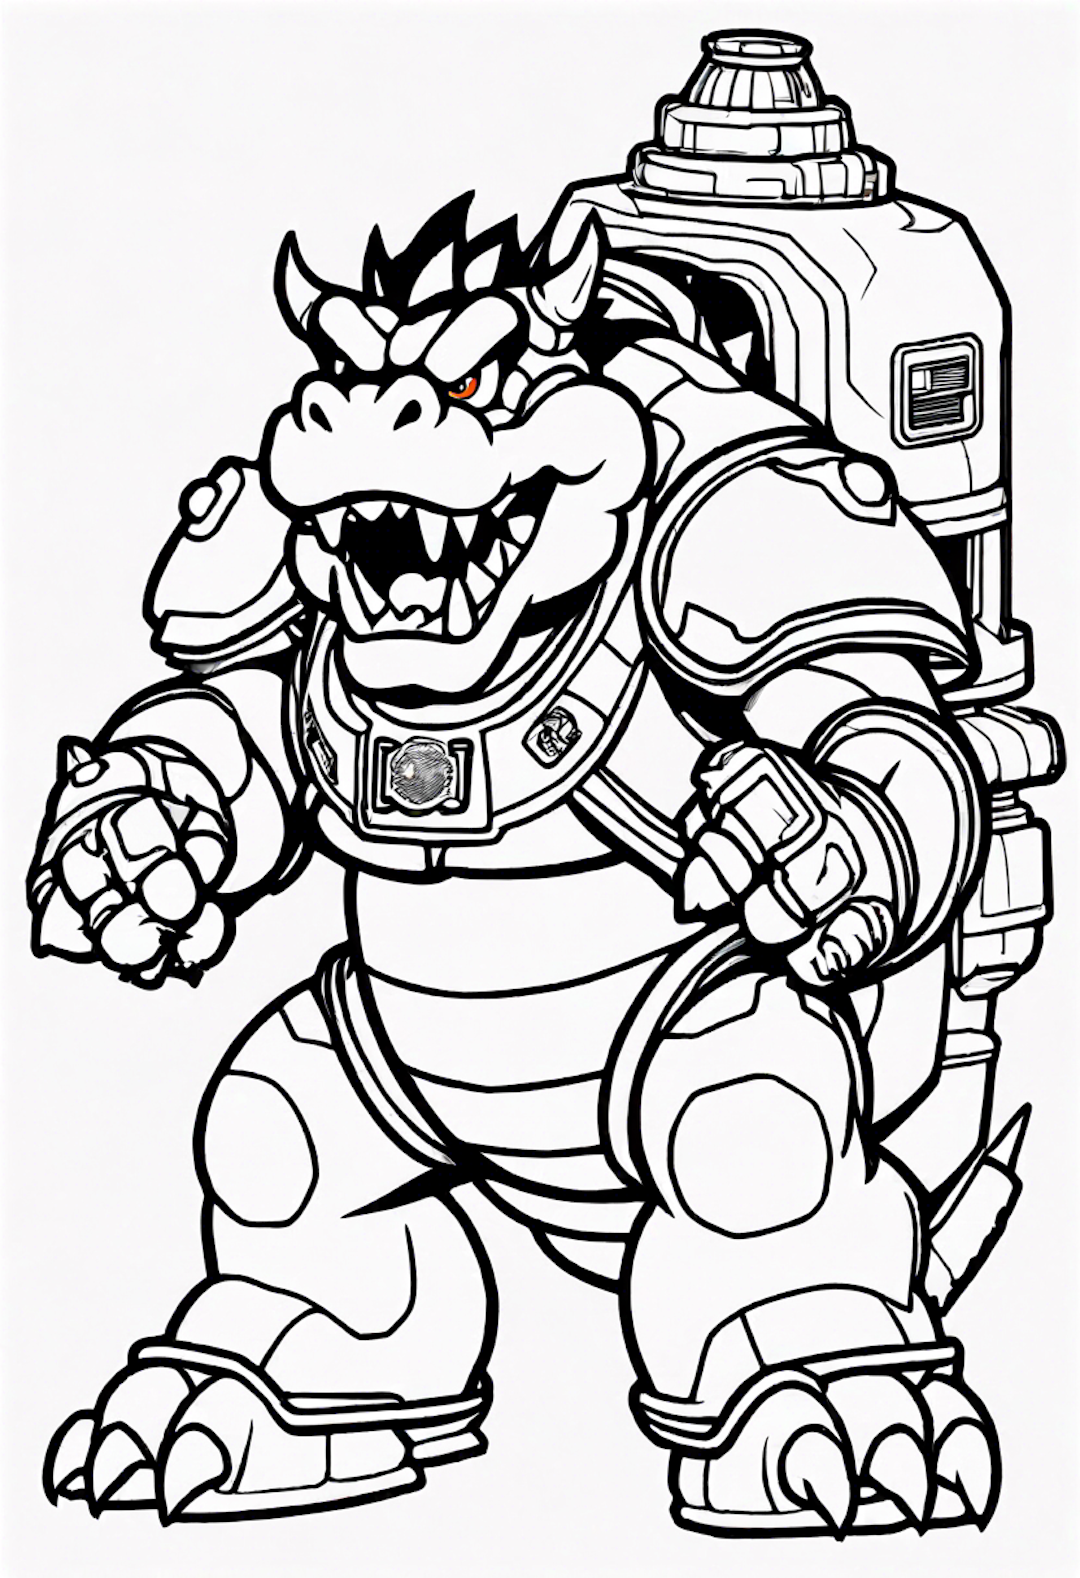 Bowser At The Space Station